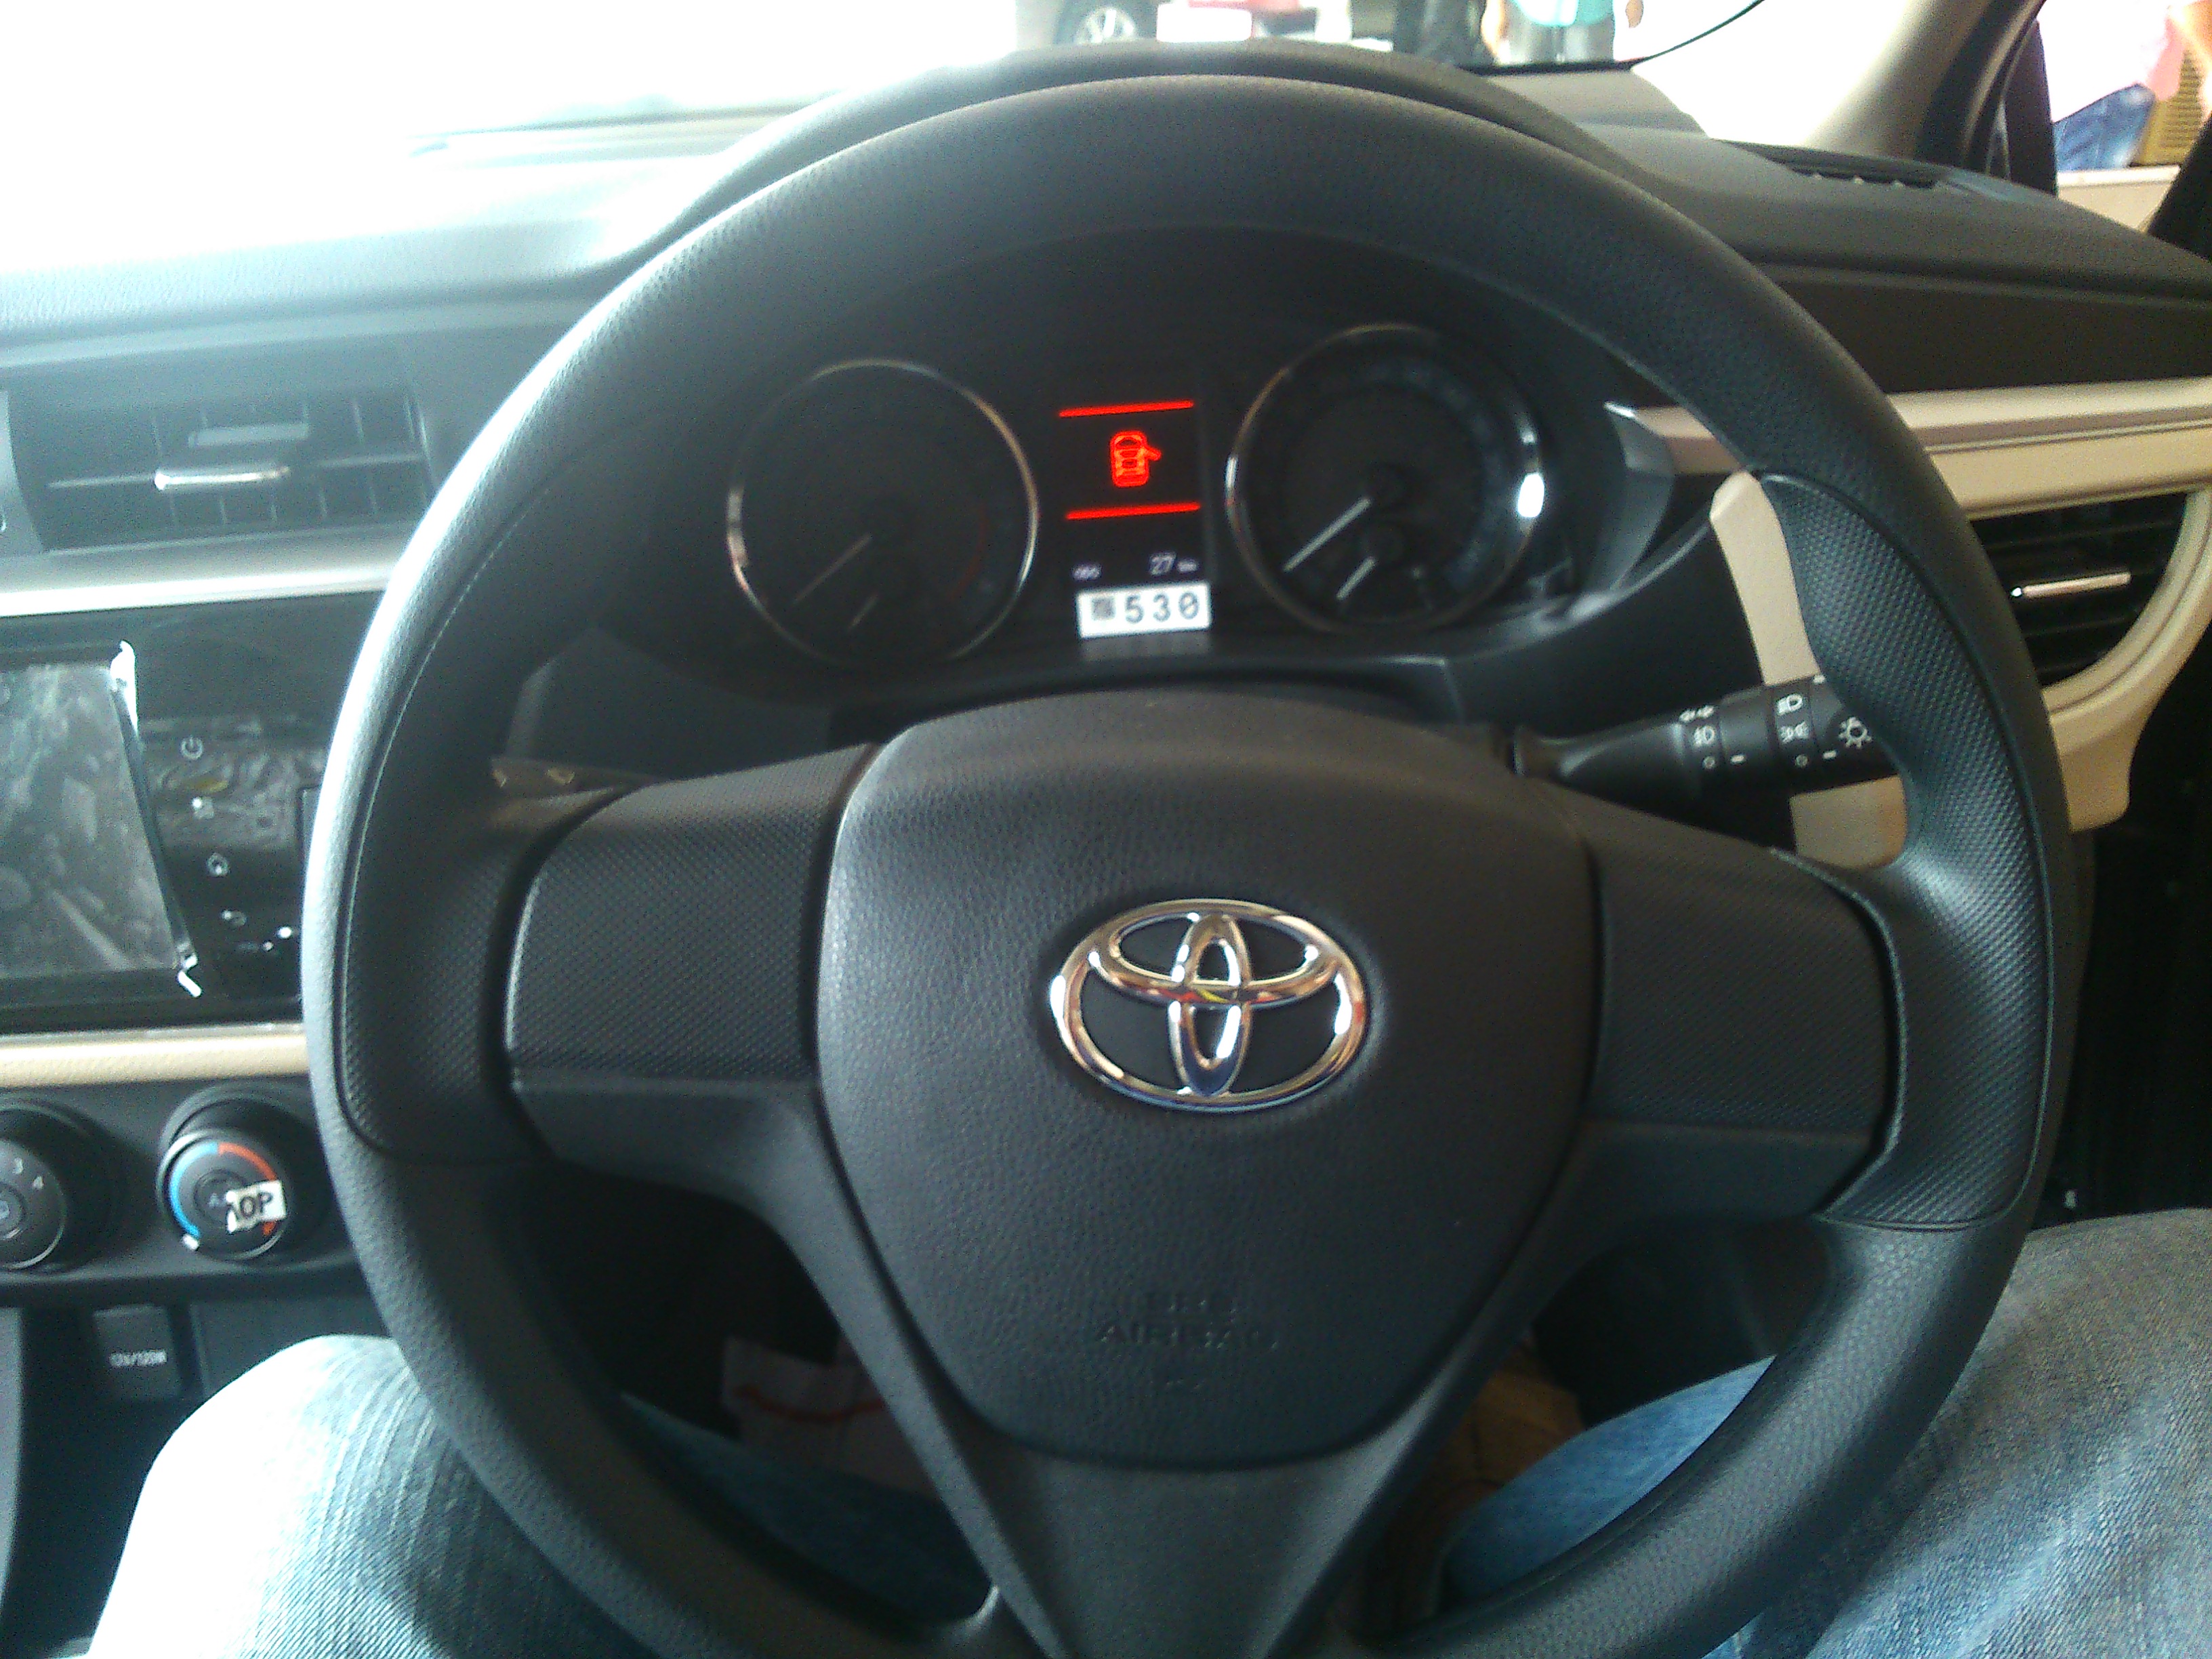 All About Cars Toyota Corolla 2014 Dealership Review